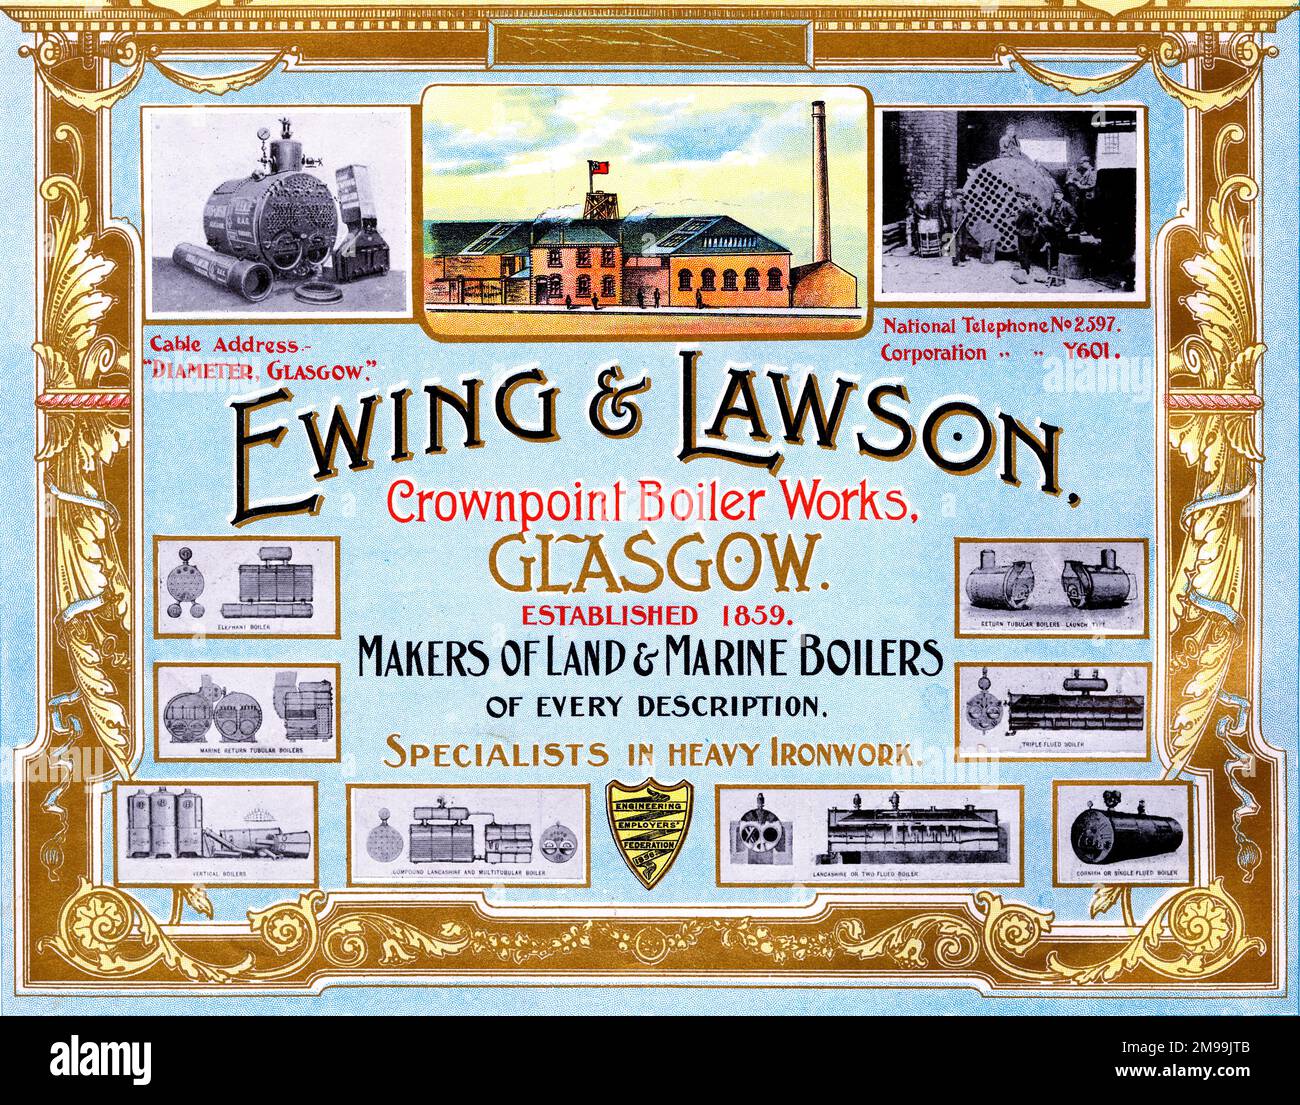 Advert for Ewing & Lawson, Boiler Makers, Glasgow, Scotland. Stock Photo